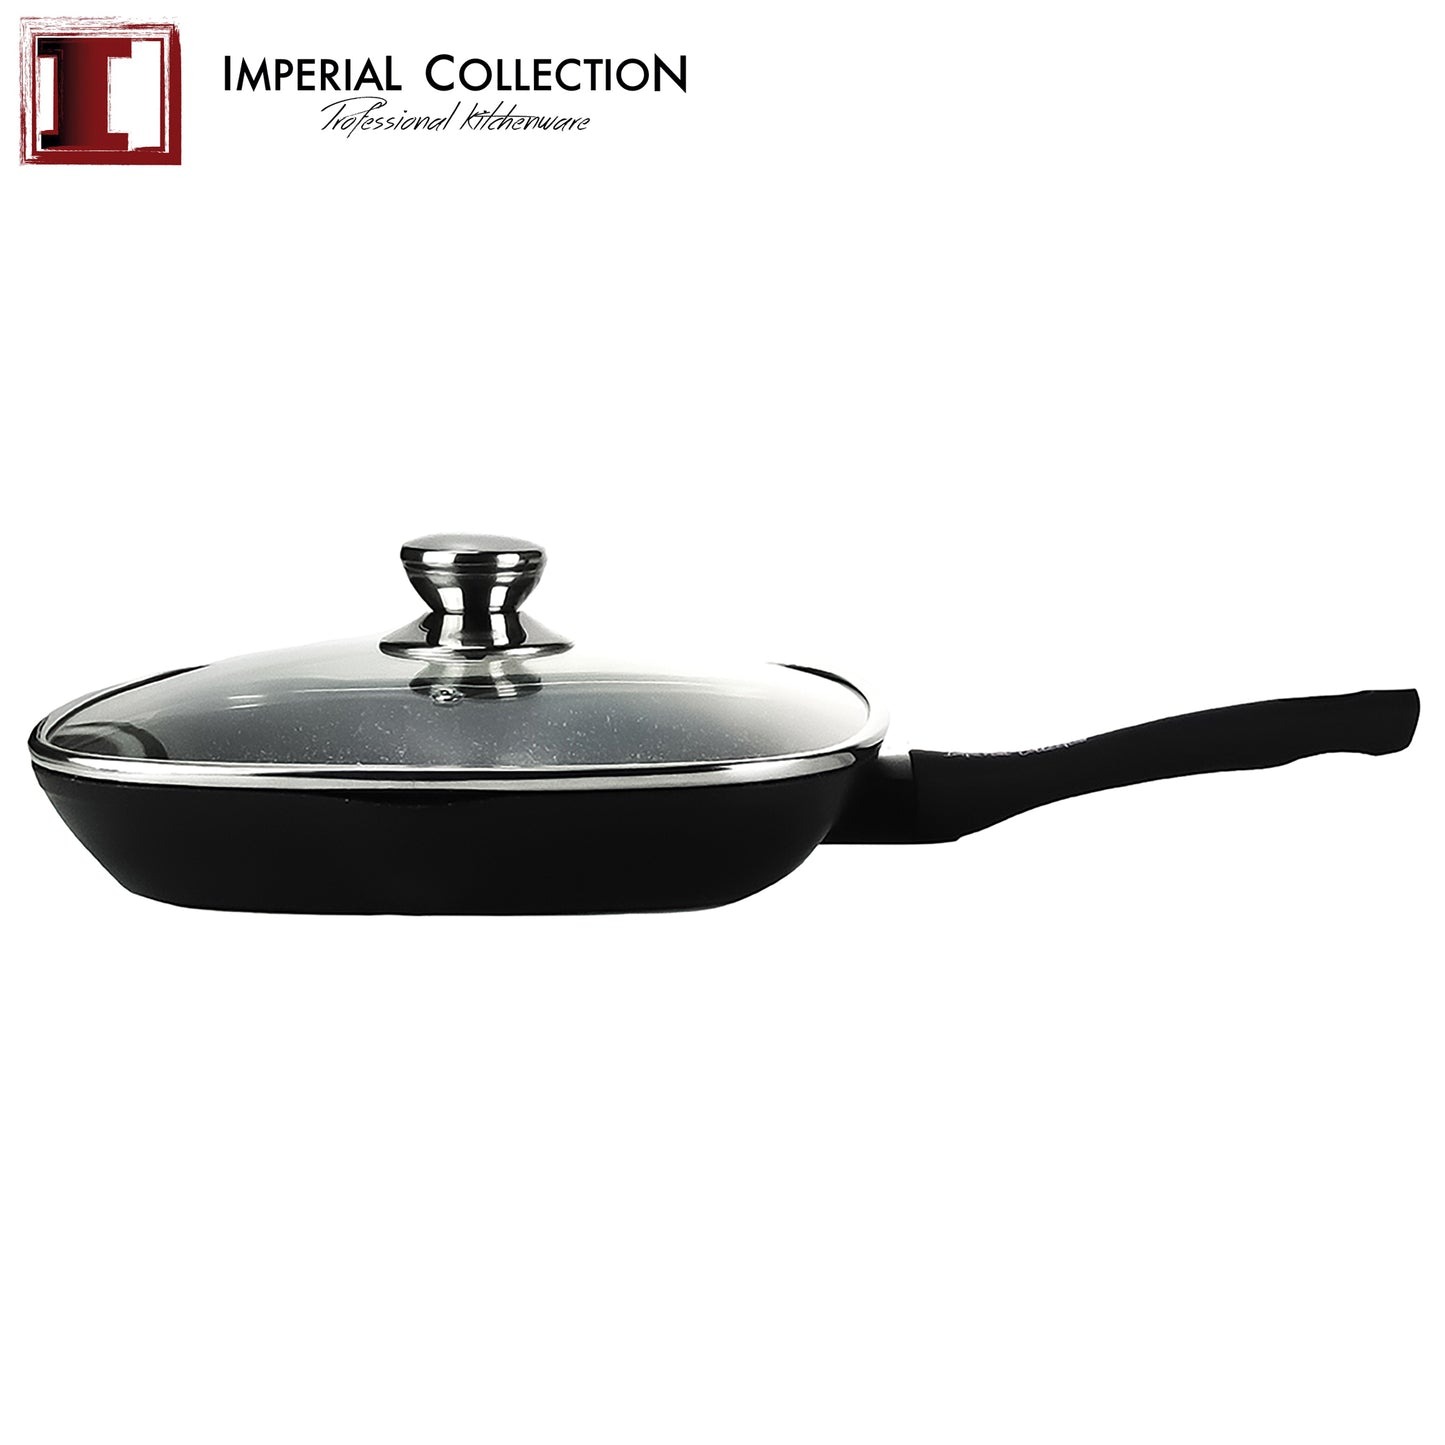 Imperial Collection 28 cm marmorbelagd grillpanna med lock